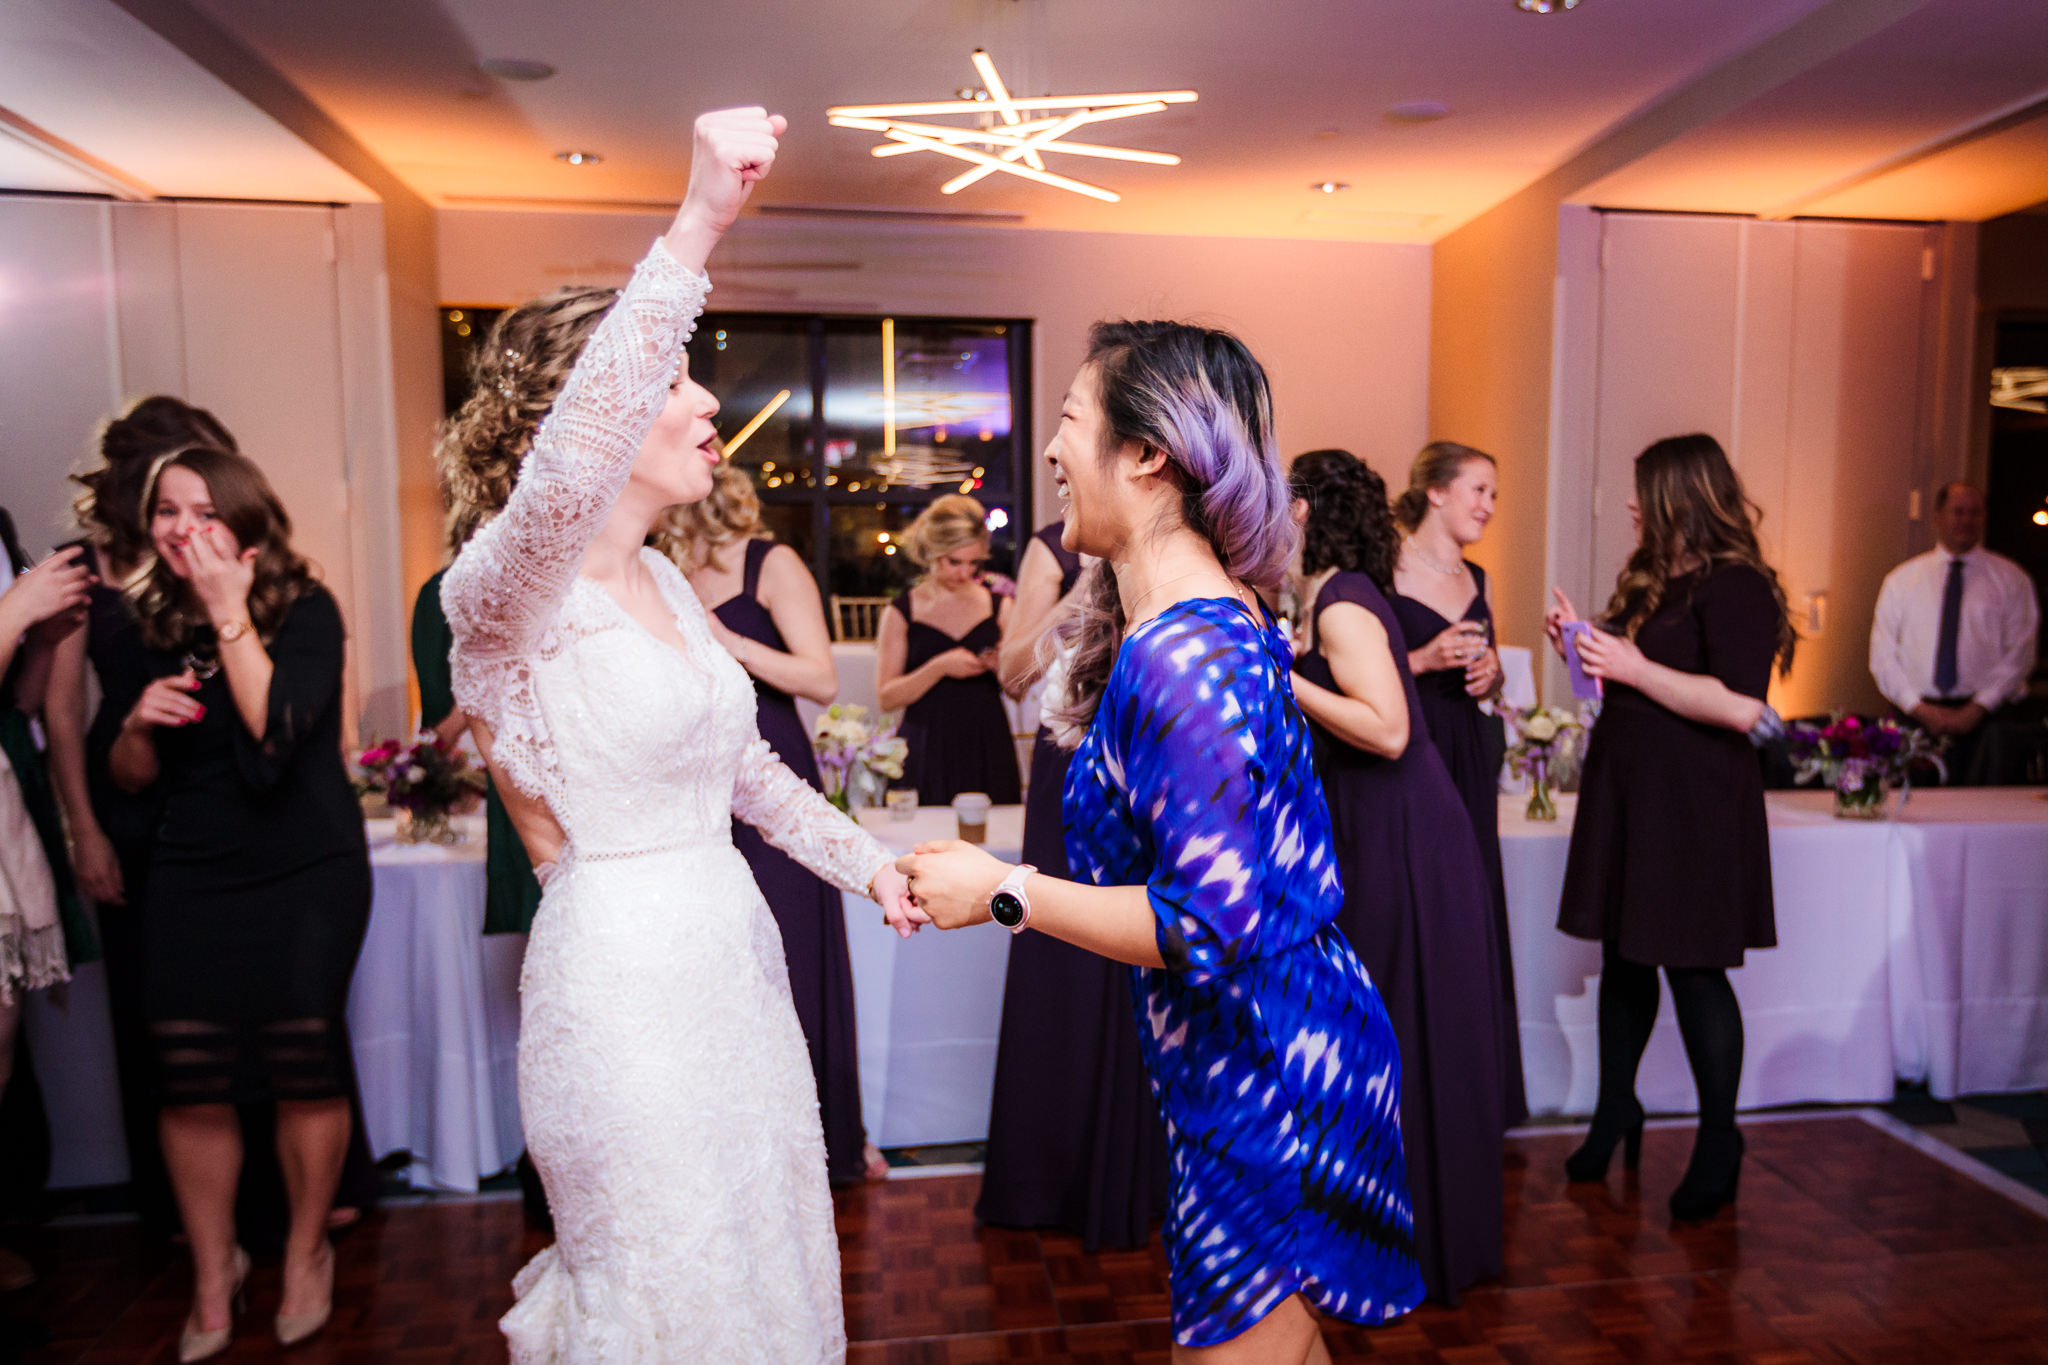 Bride cheers with the girl who caught the bouquet